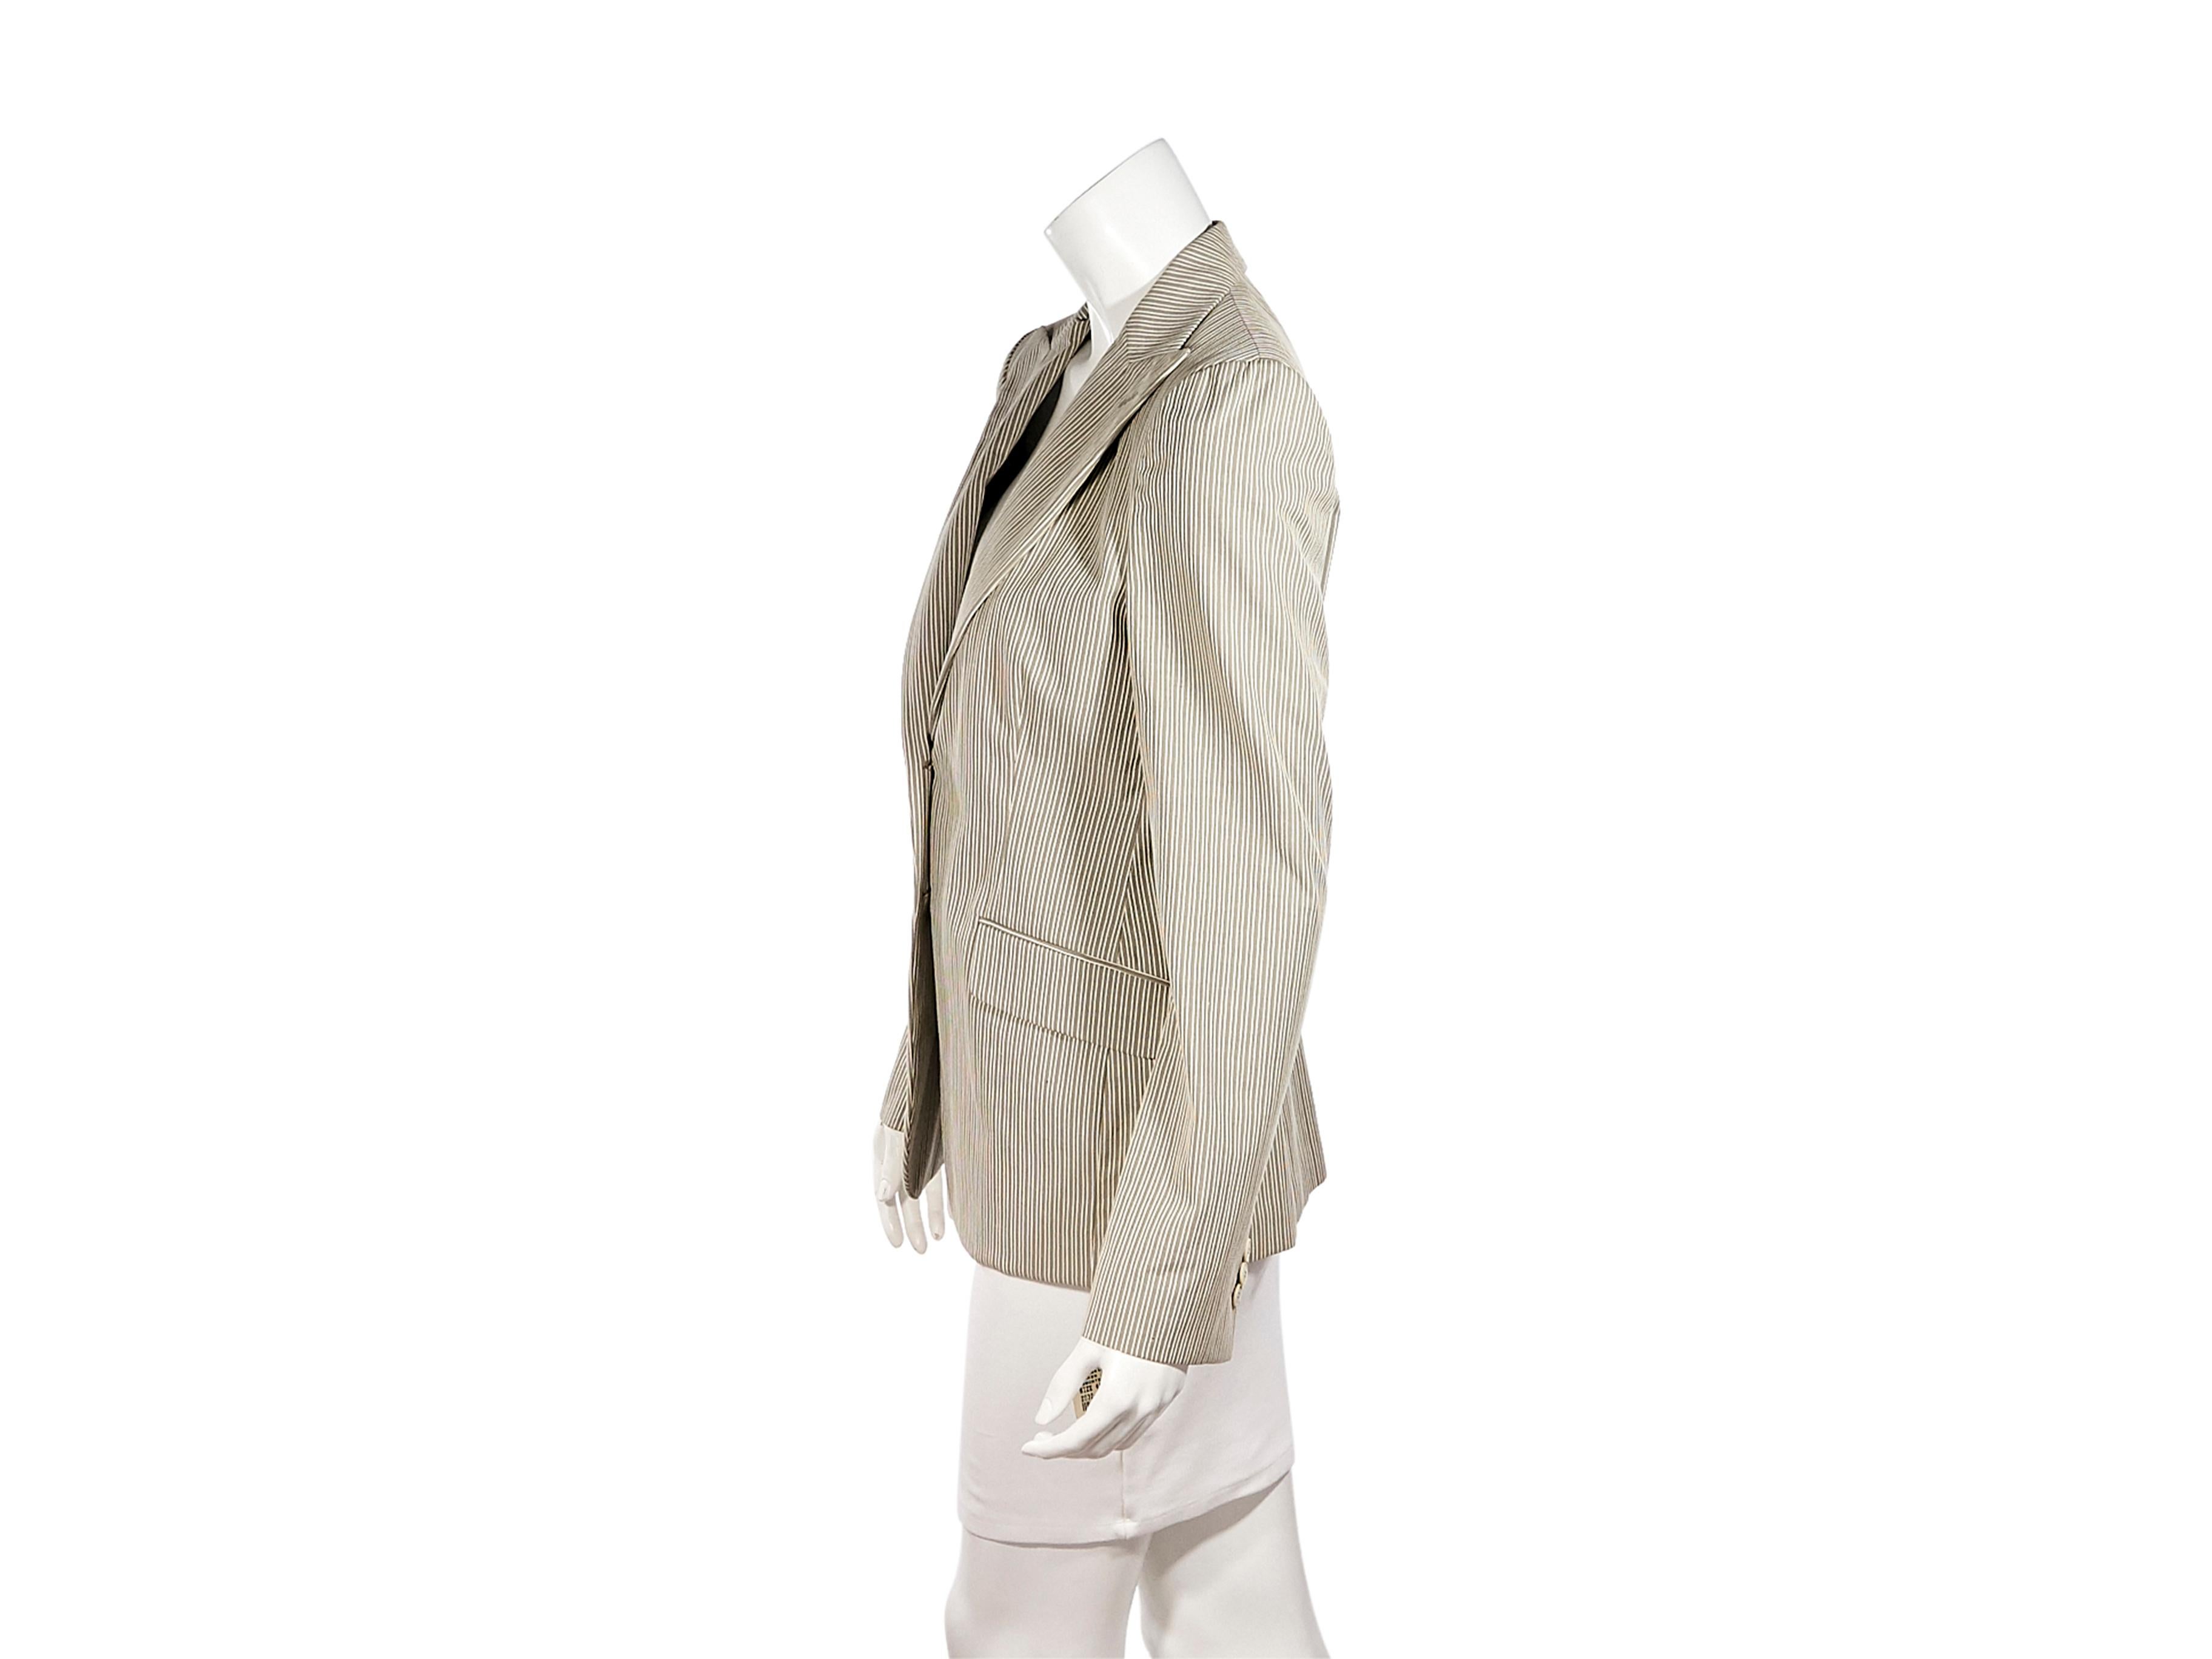 Product details:  Grey and white striped cotton blazer by Loro Piana.  Peak lapel.  Long sleeves.  Three-button details at cuffs.  Button-front closure.  Waist flap pockets.  Center back hem vent.  39